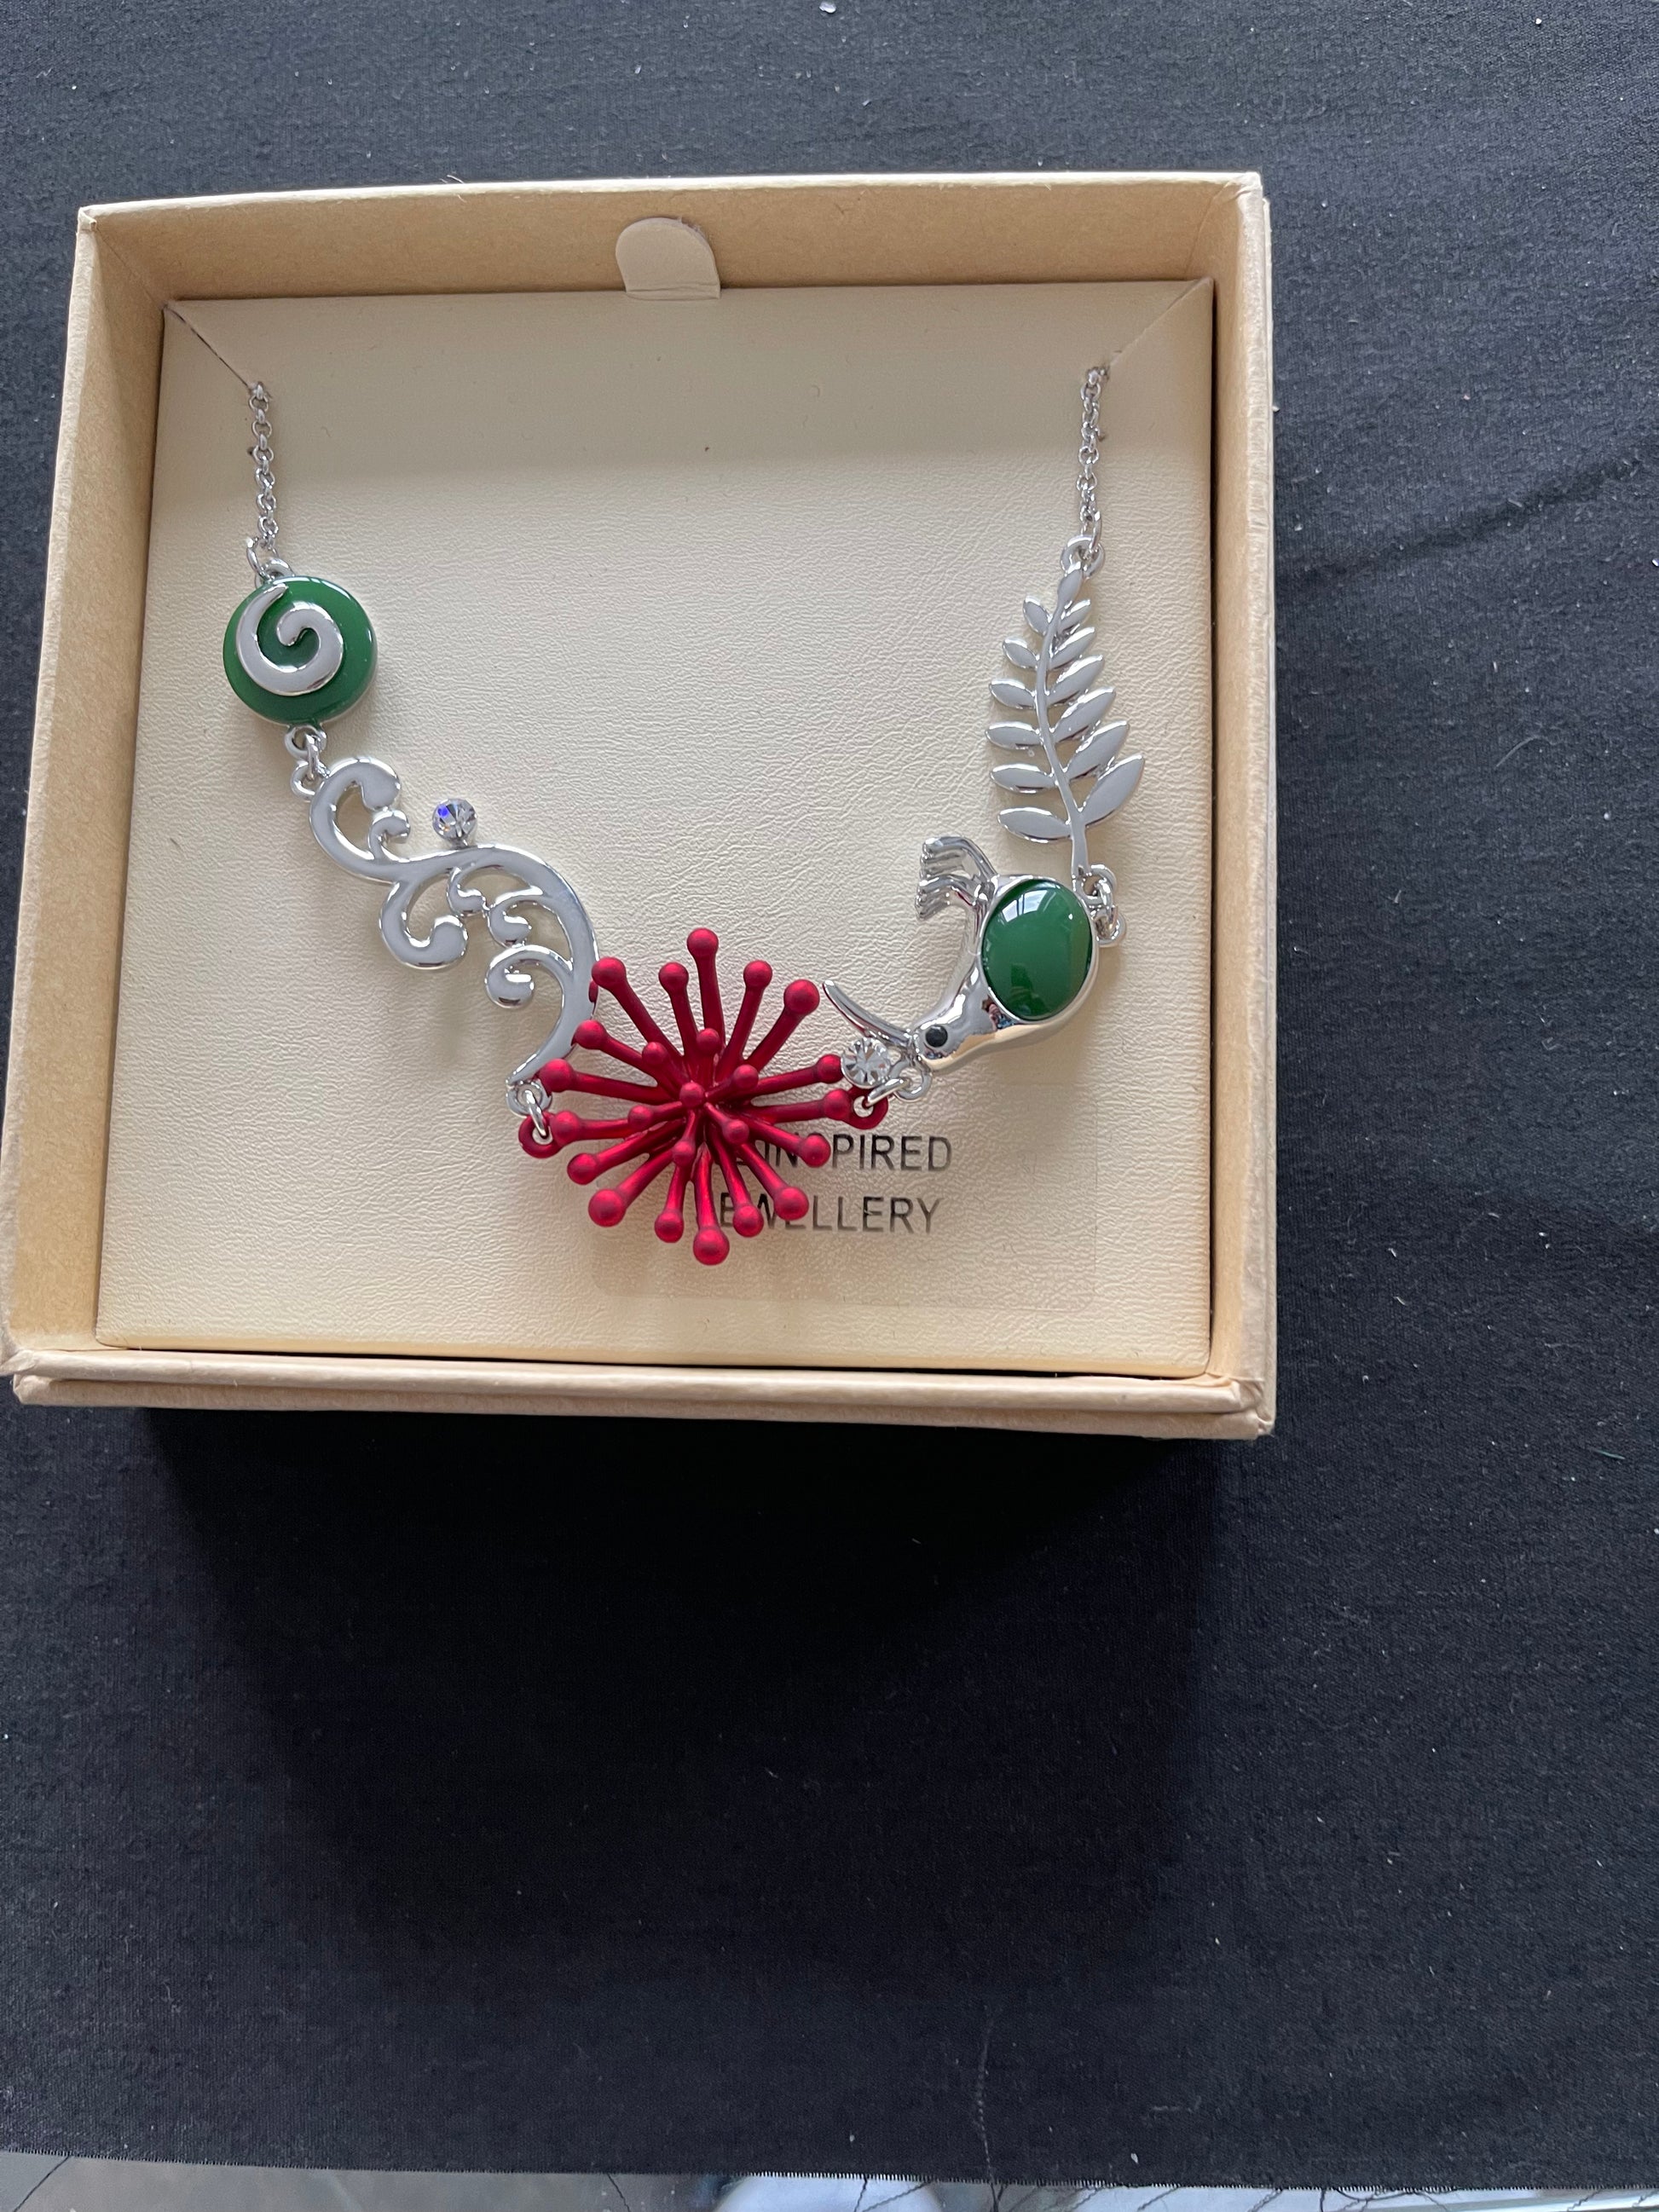 Puhutukawa Jade Necklace and Earrings